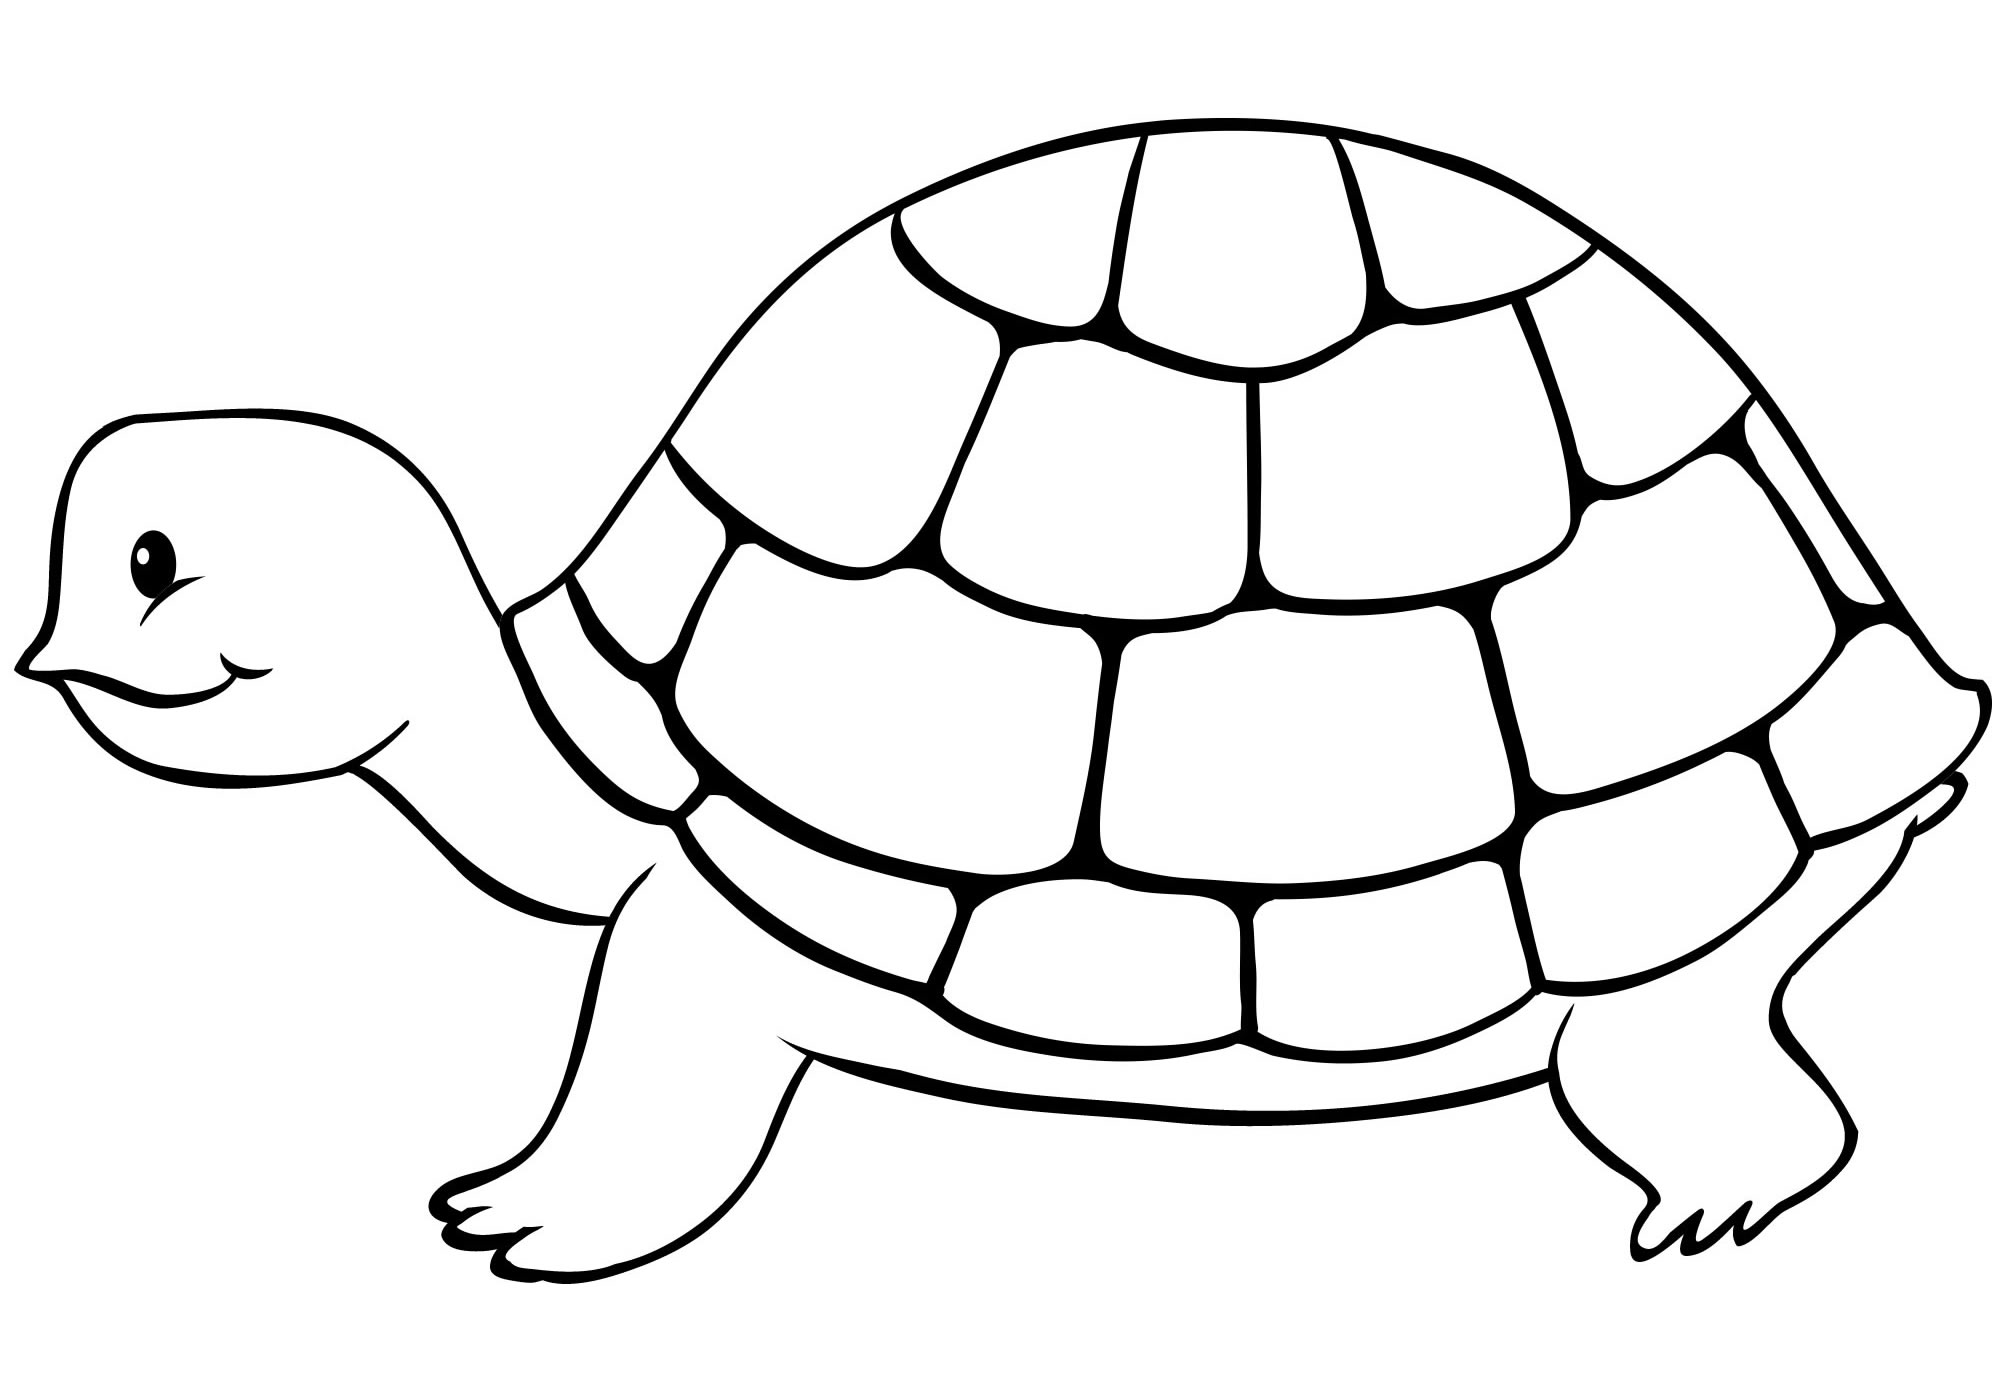 Turtle for children 6 7 years old #6